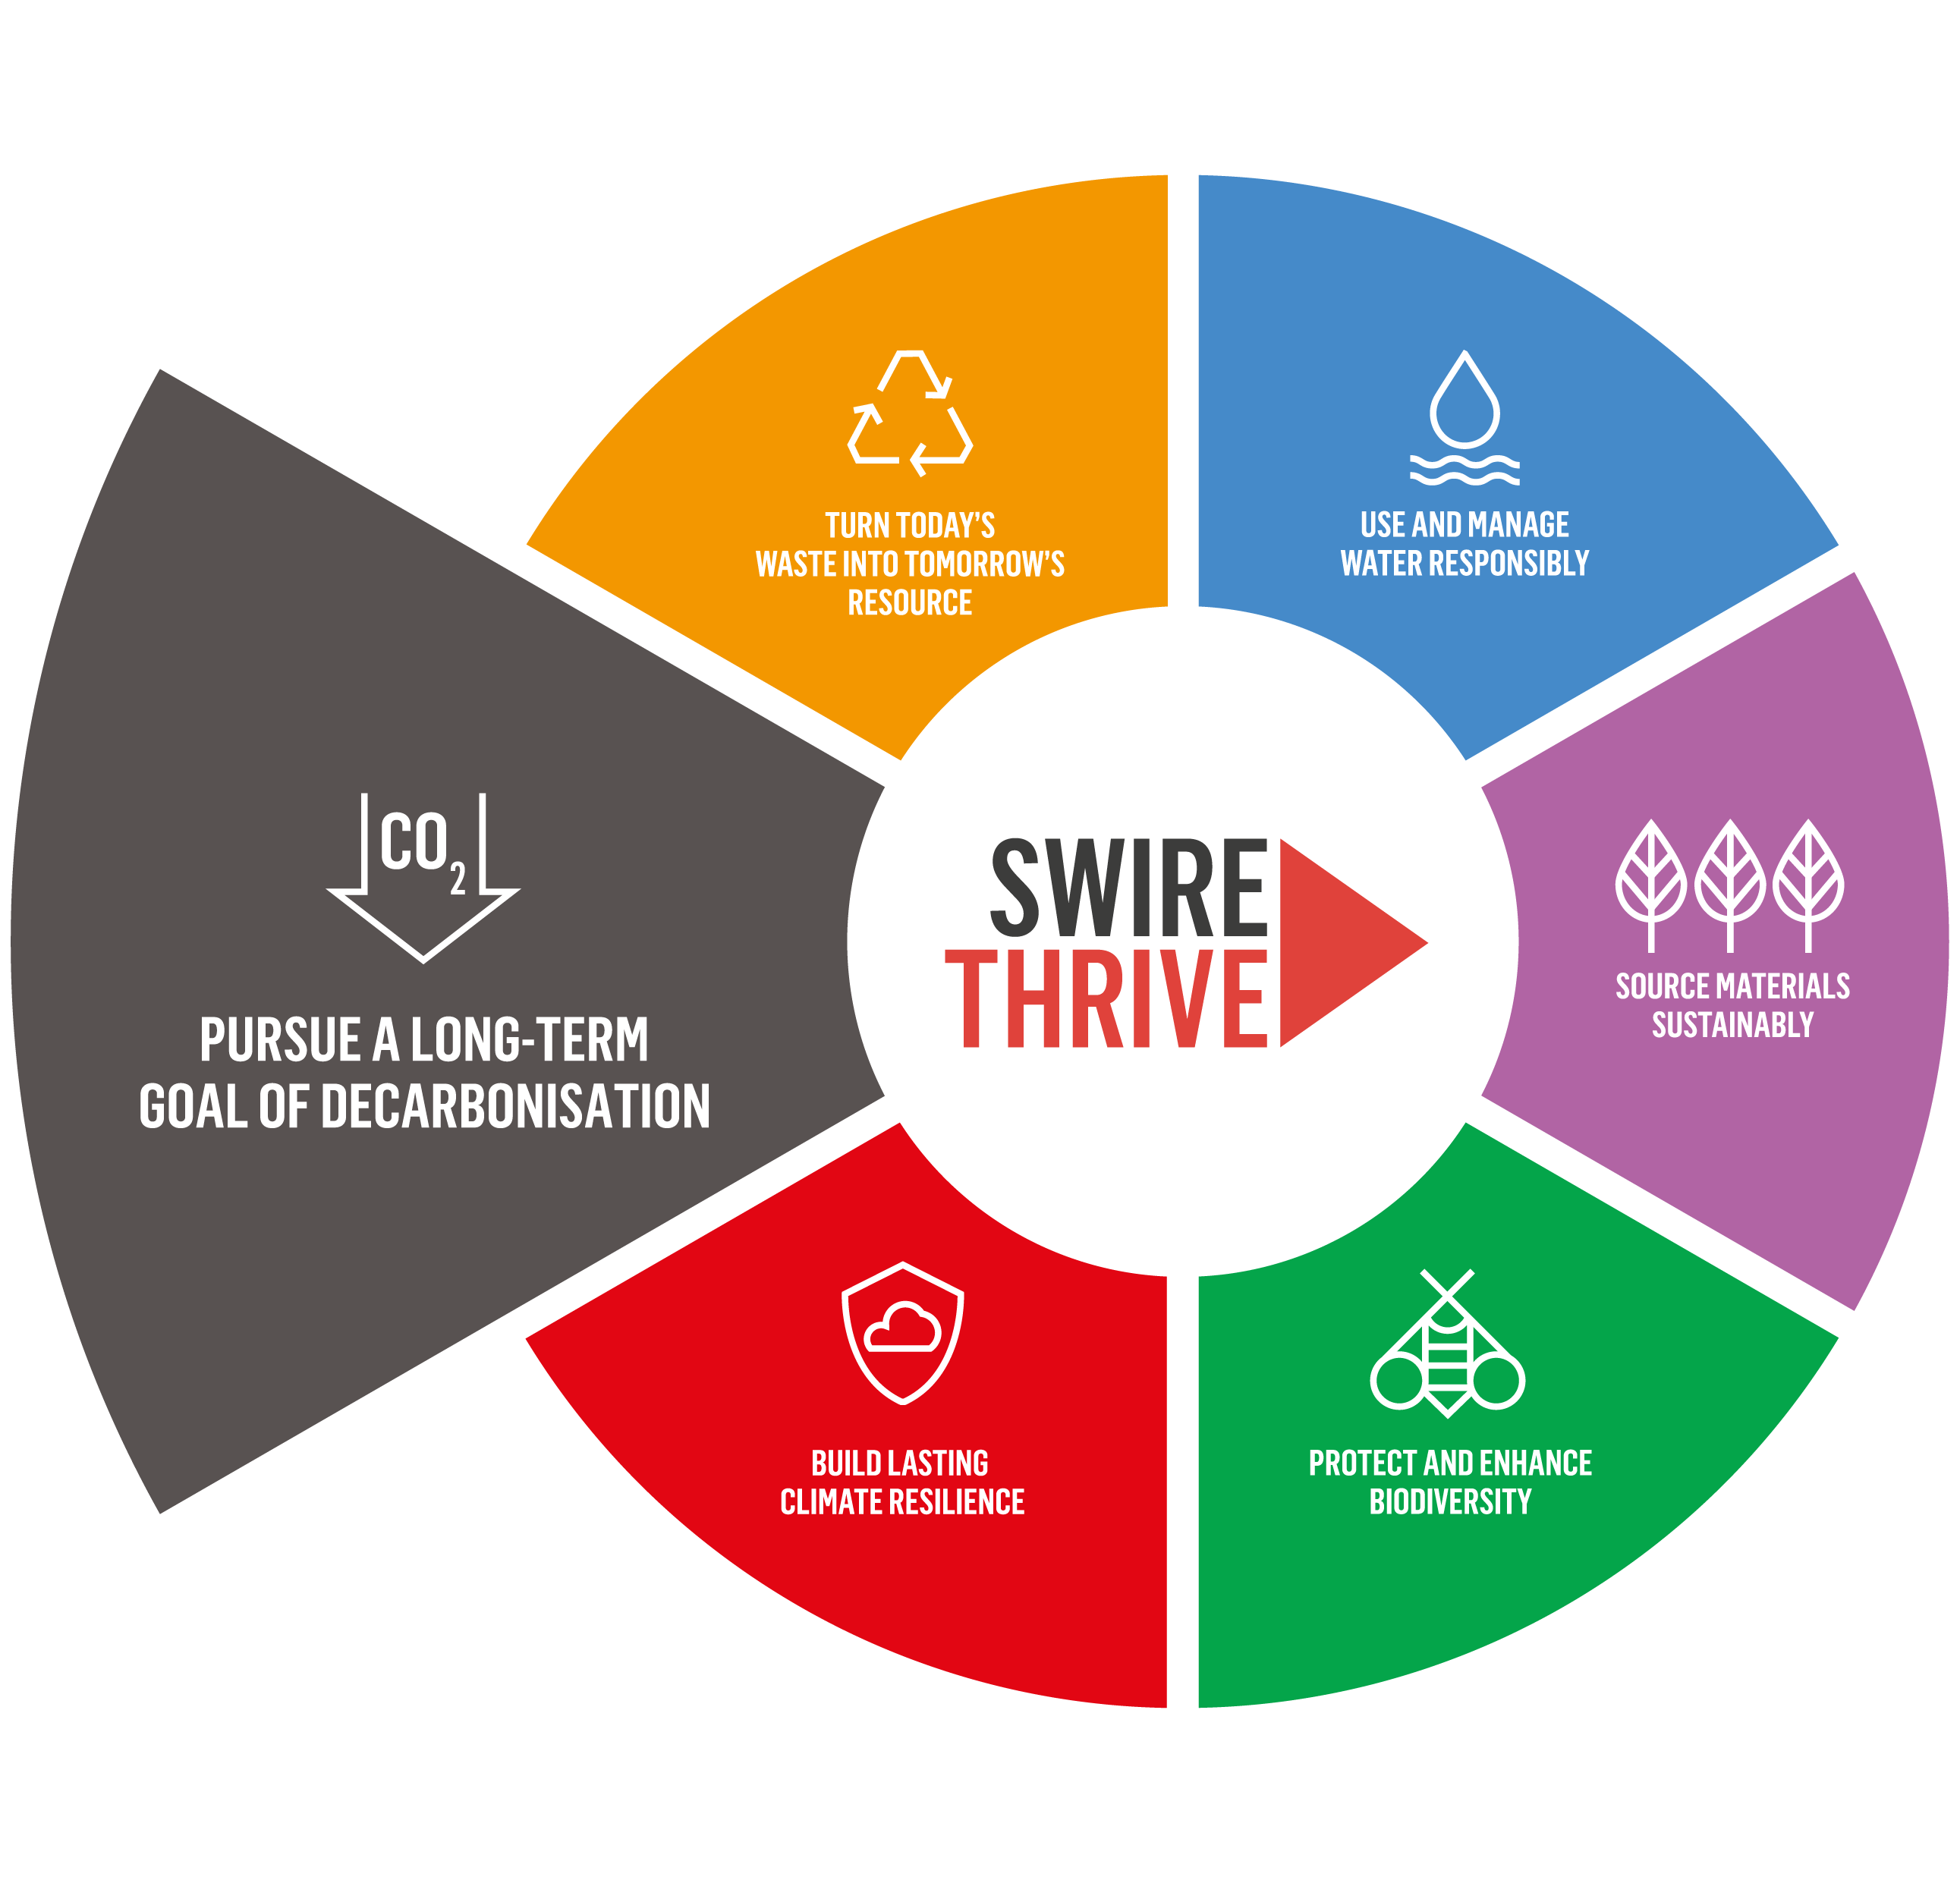 SWIRE THRIVE - Pursue a long-term goal of decarbonisation